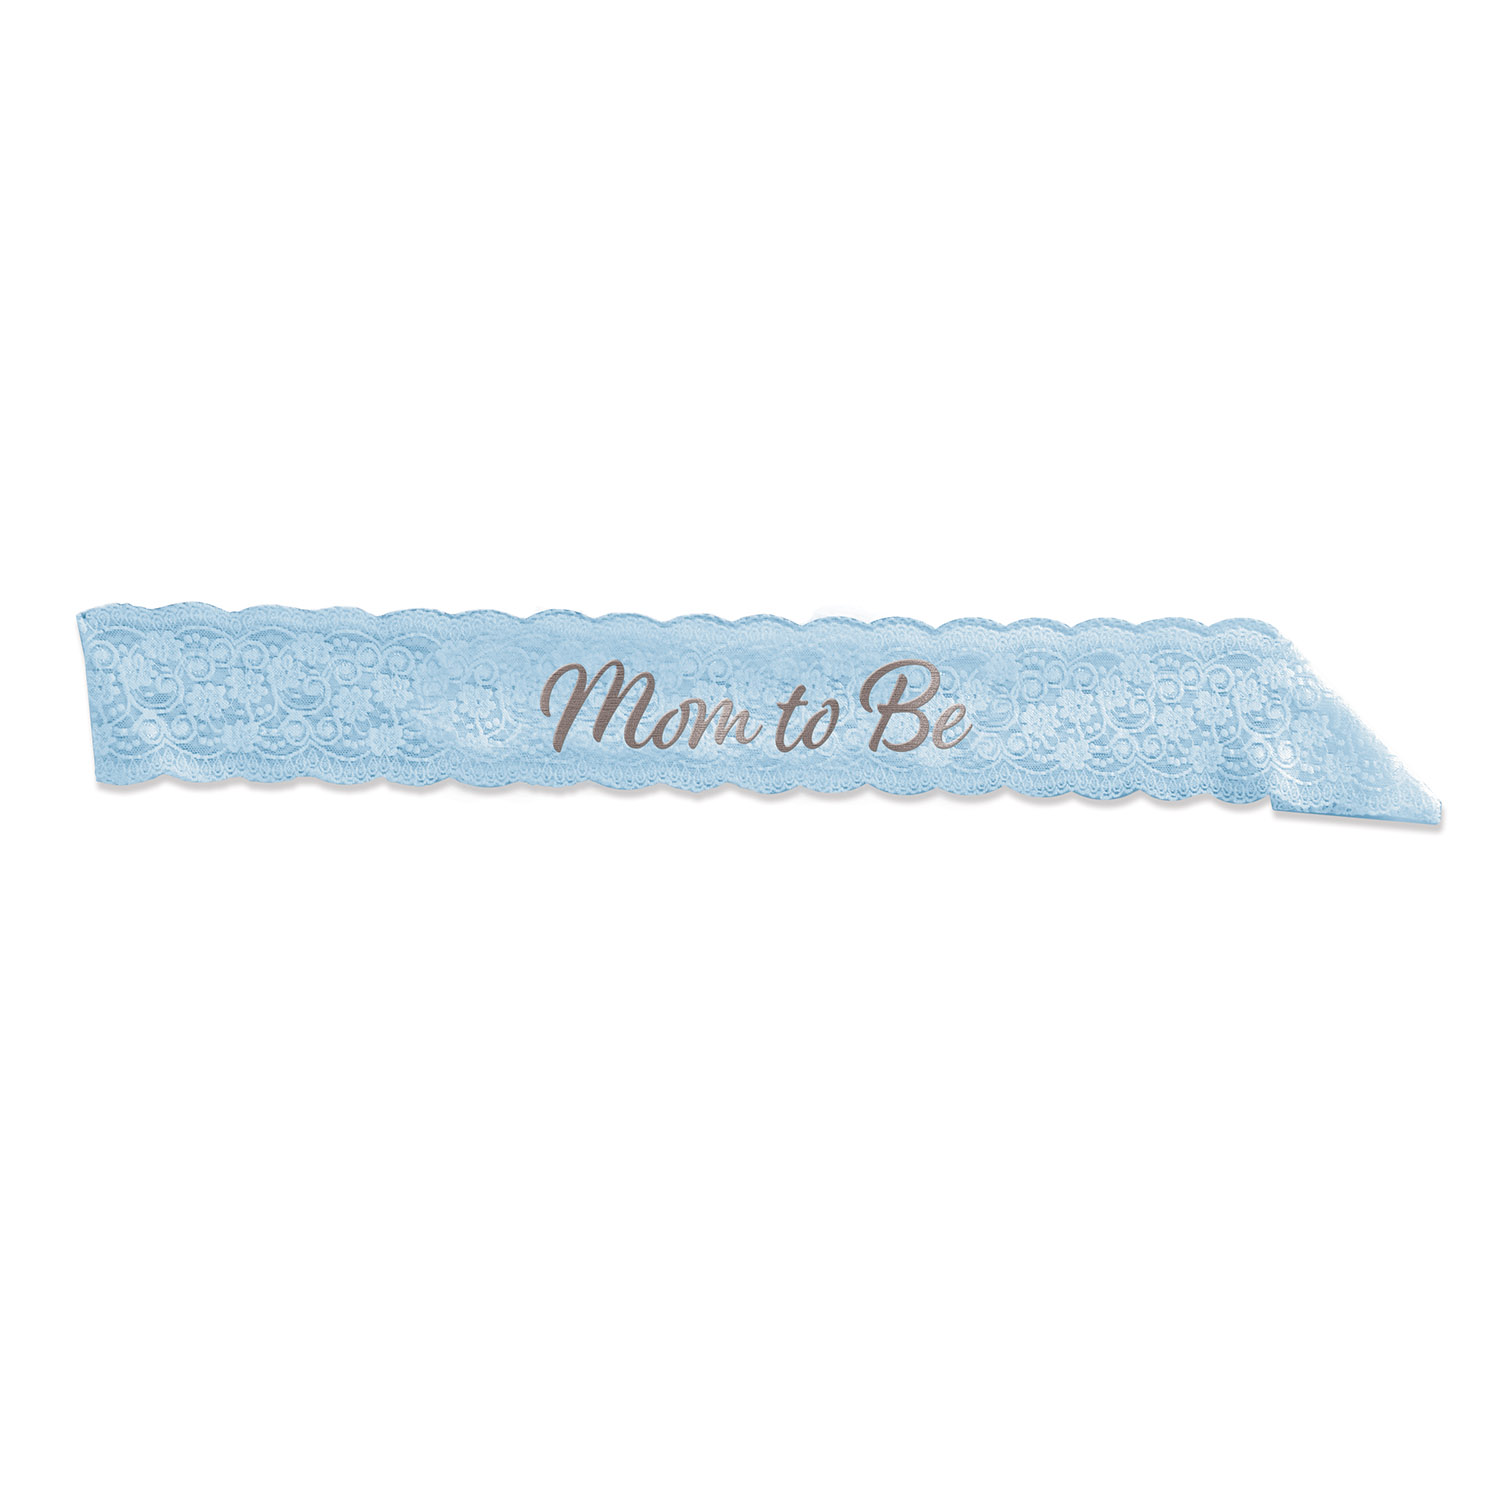 MOM TO BE LACE SASH (6) image